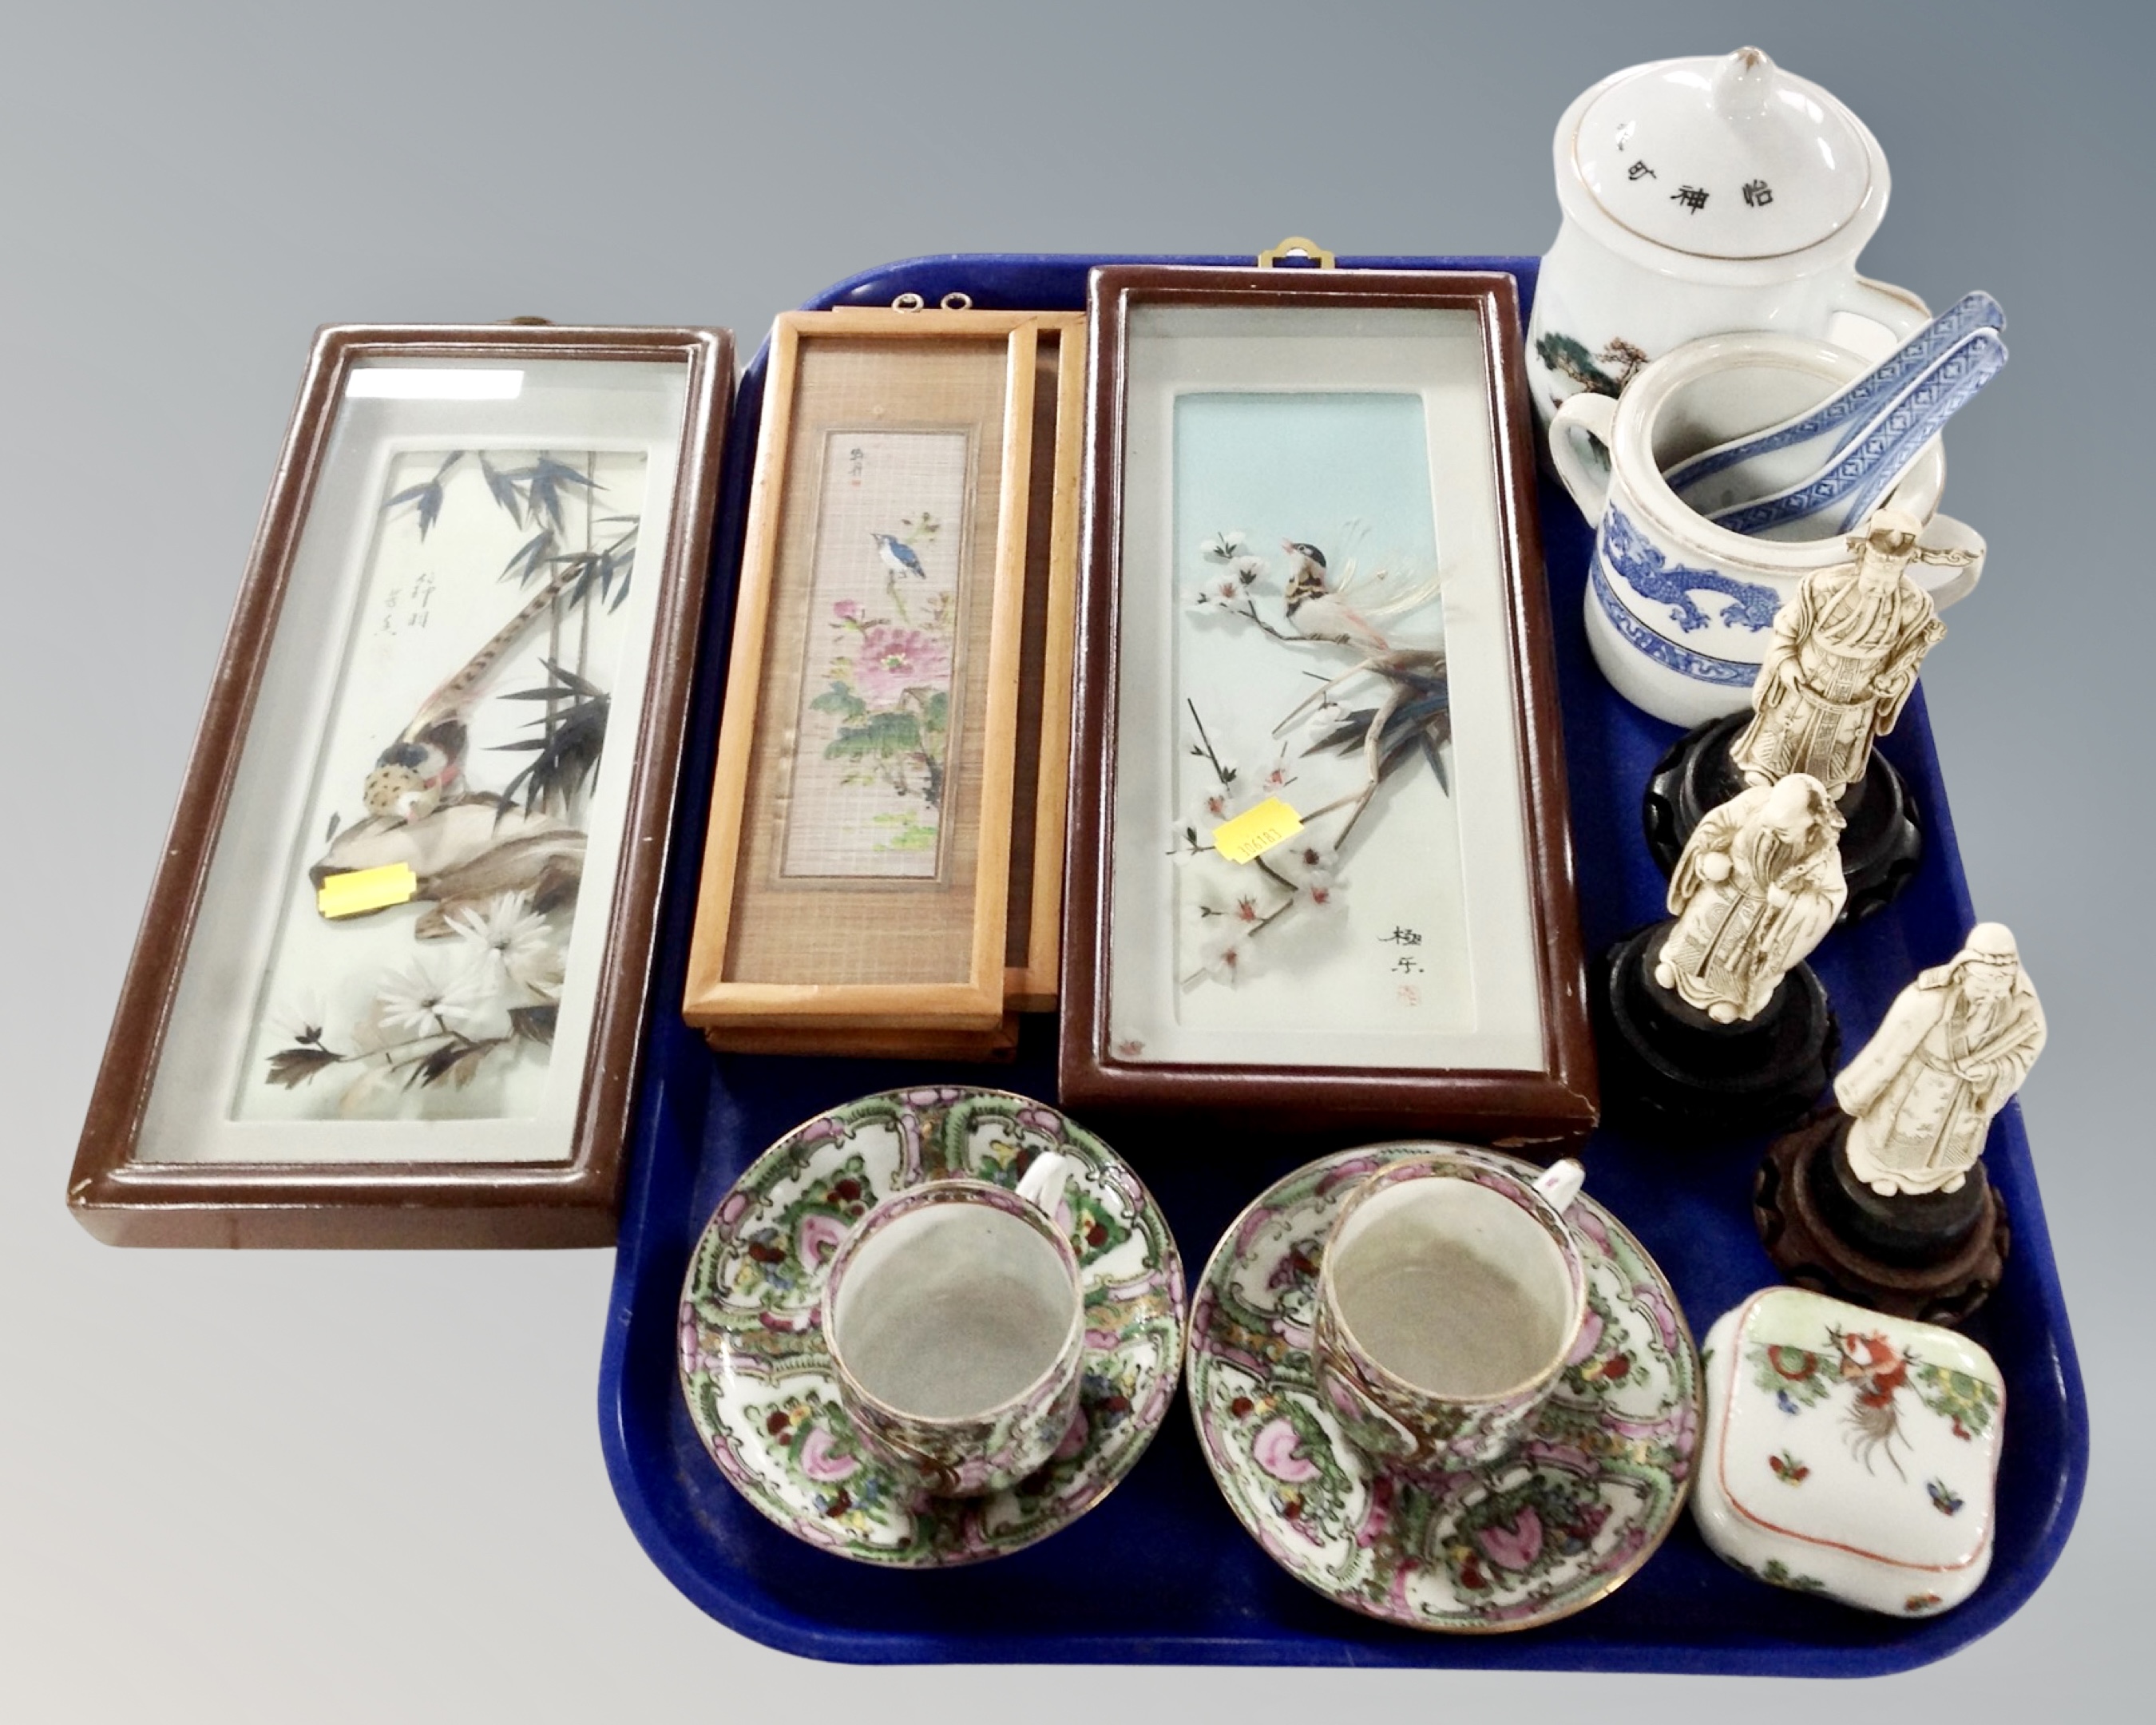 A tray containing Oriental wares including a pair of Cantonese eggshell teacups with saucers,